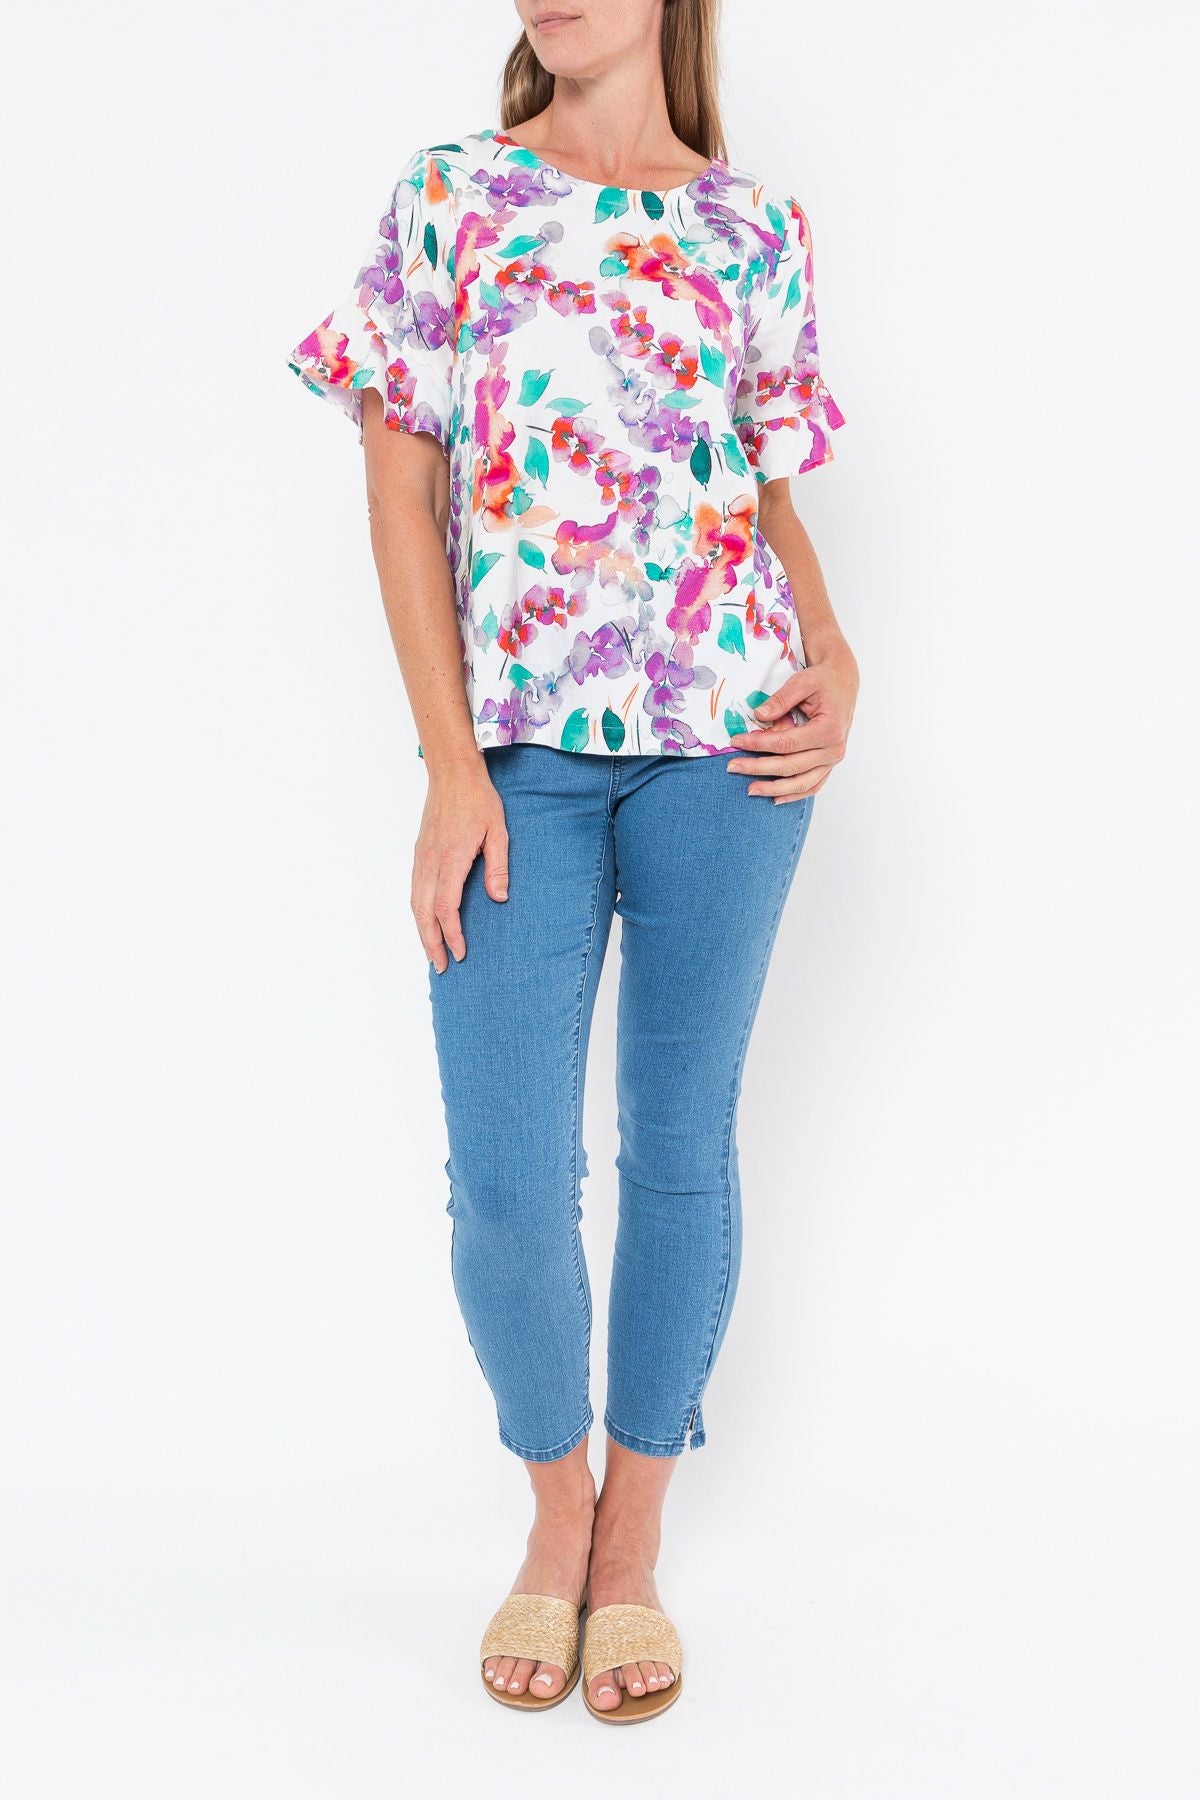 Painterly Floral Top